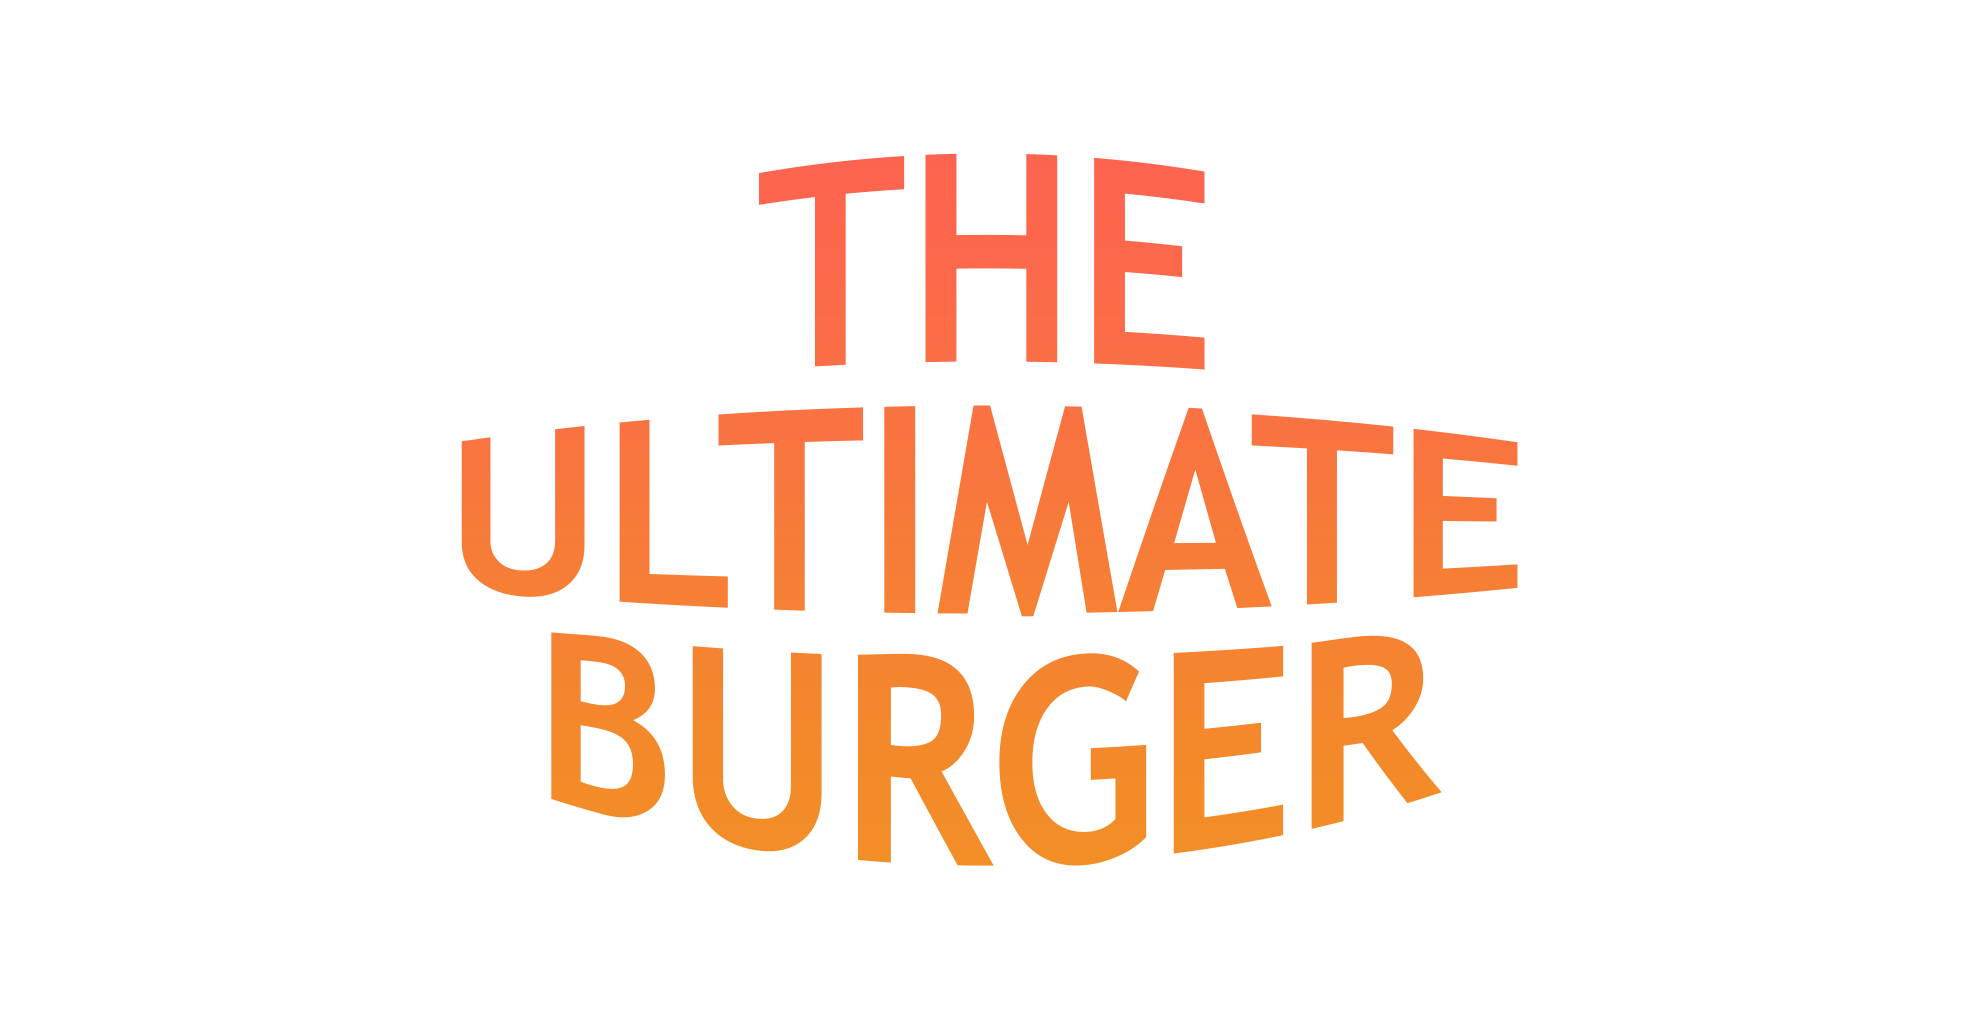 The Ultimate Burger